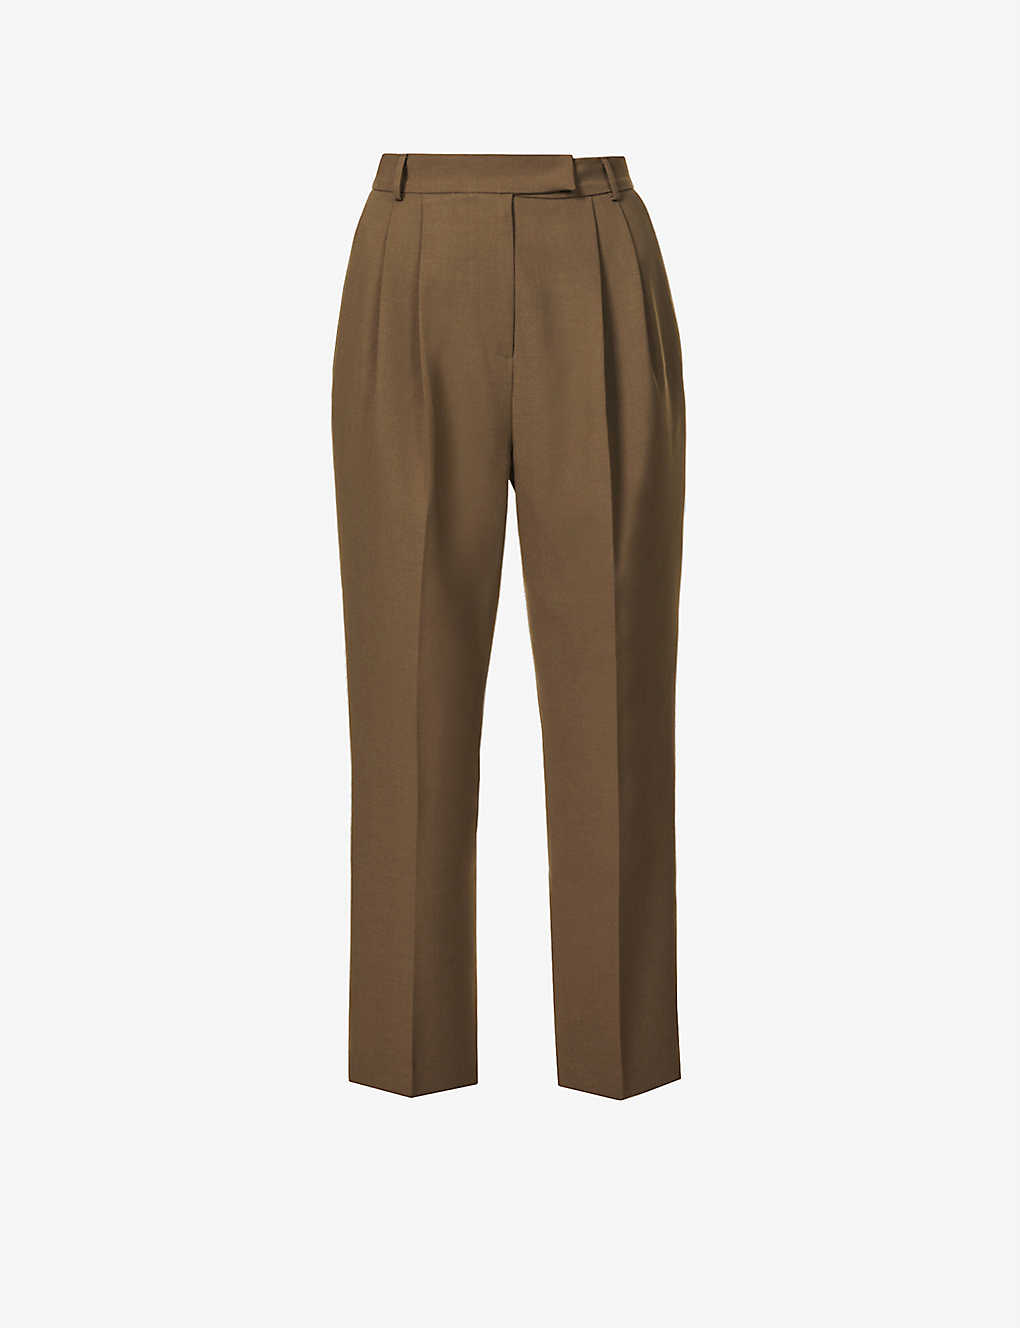 Shop The Frankie Shop Frankie Shop Women's Chocolate Bea Tapered High-rise Stretch-crepe Trousers